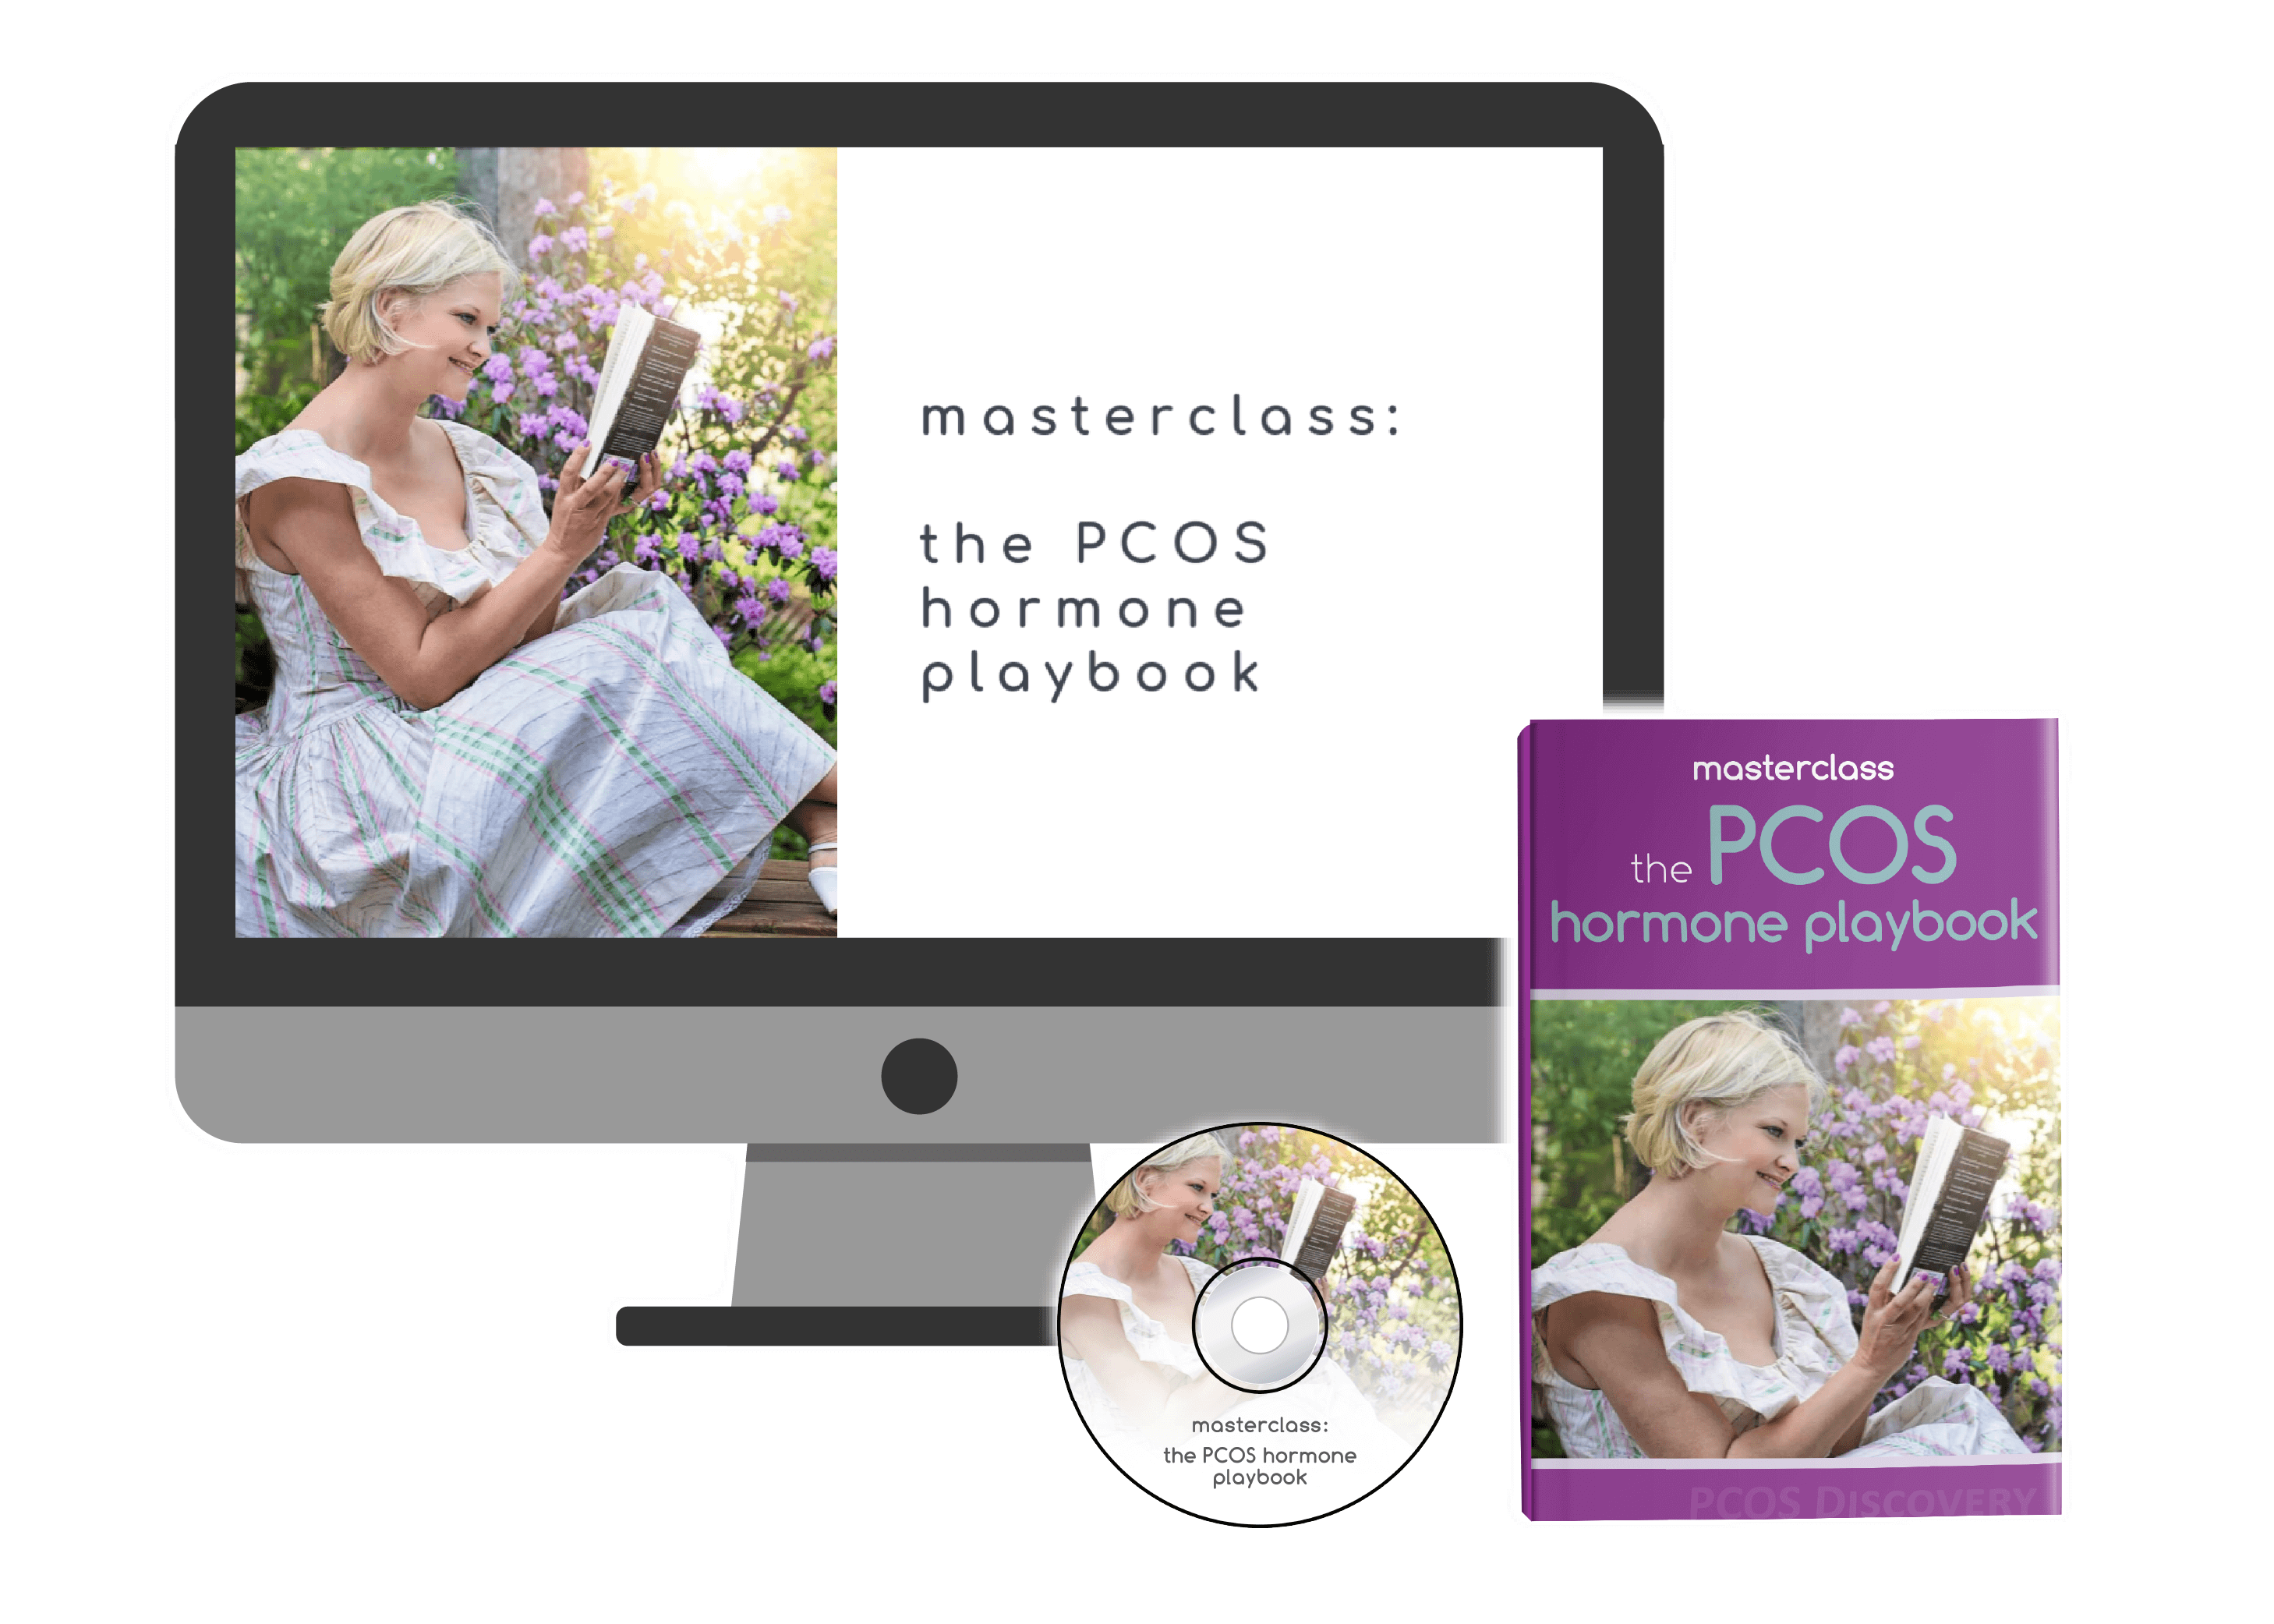 pcos diagnosis and hormone playbook masterclass